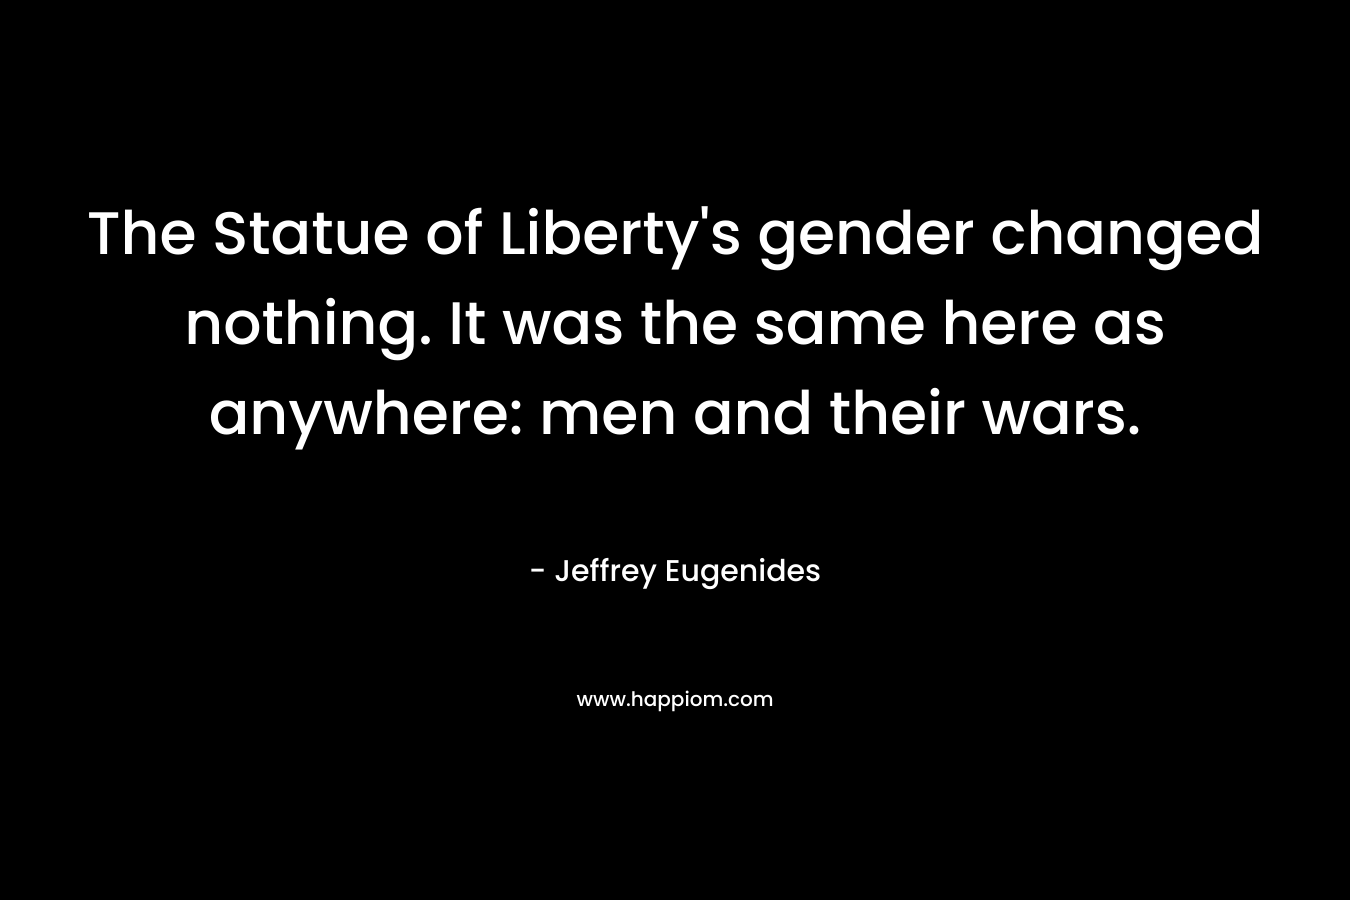 The Statue of Liberty’s gender changed nothing. It was the same here as anywhere: men and their wars. – Jeffrey Eugenides